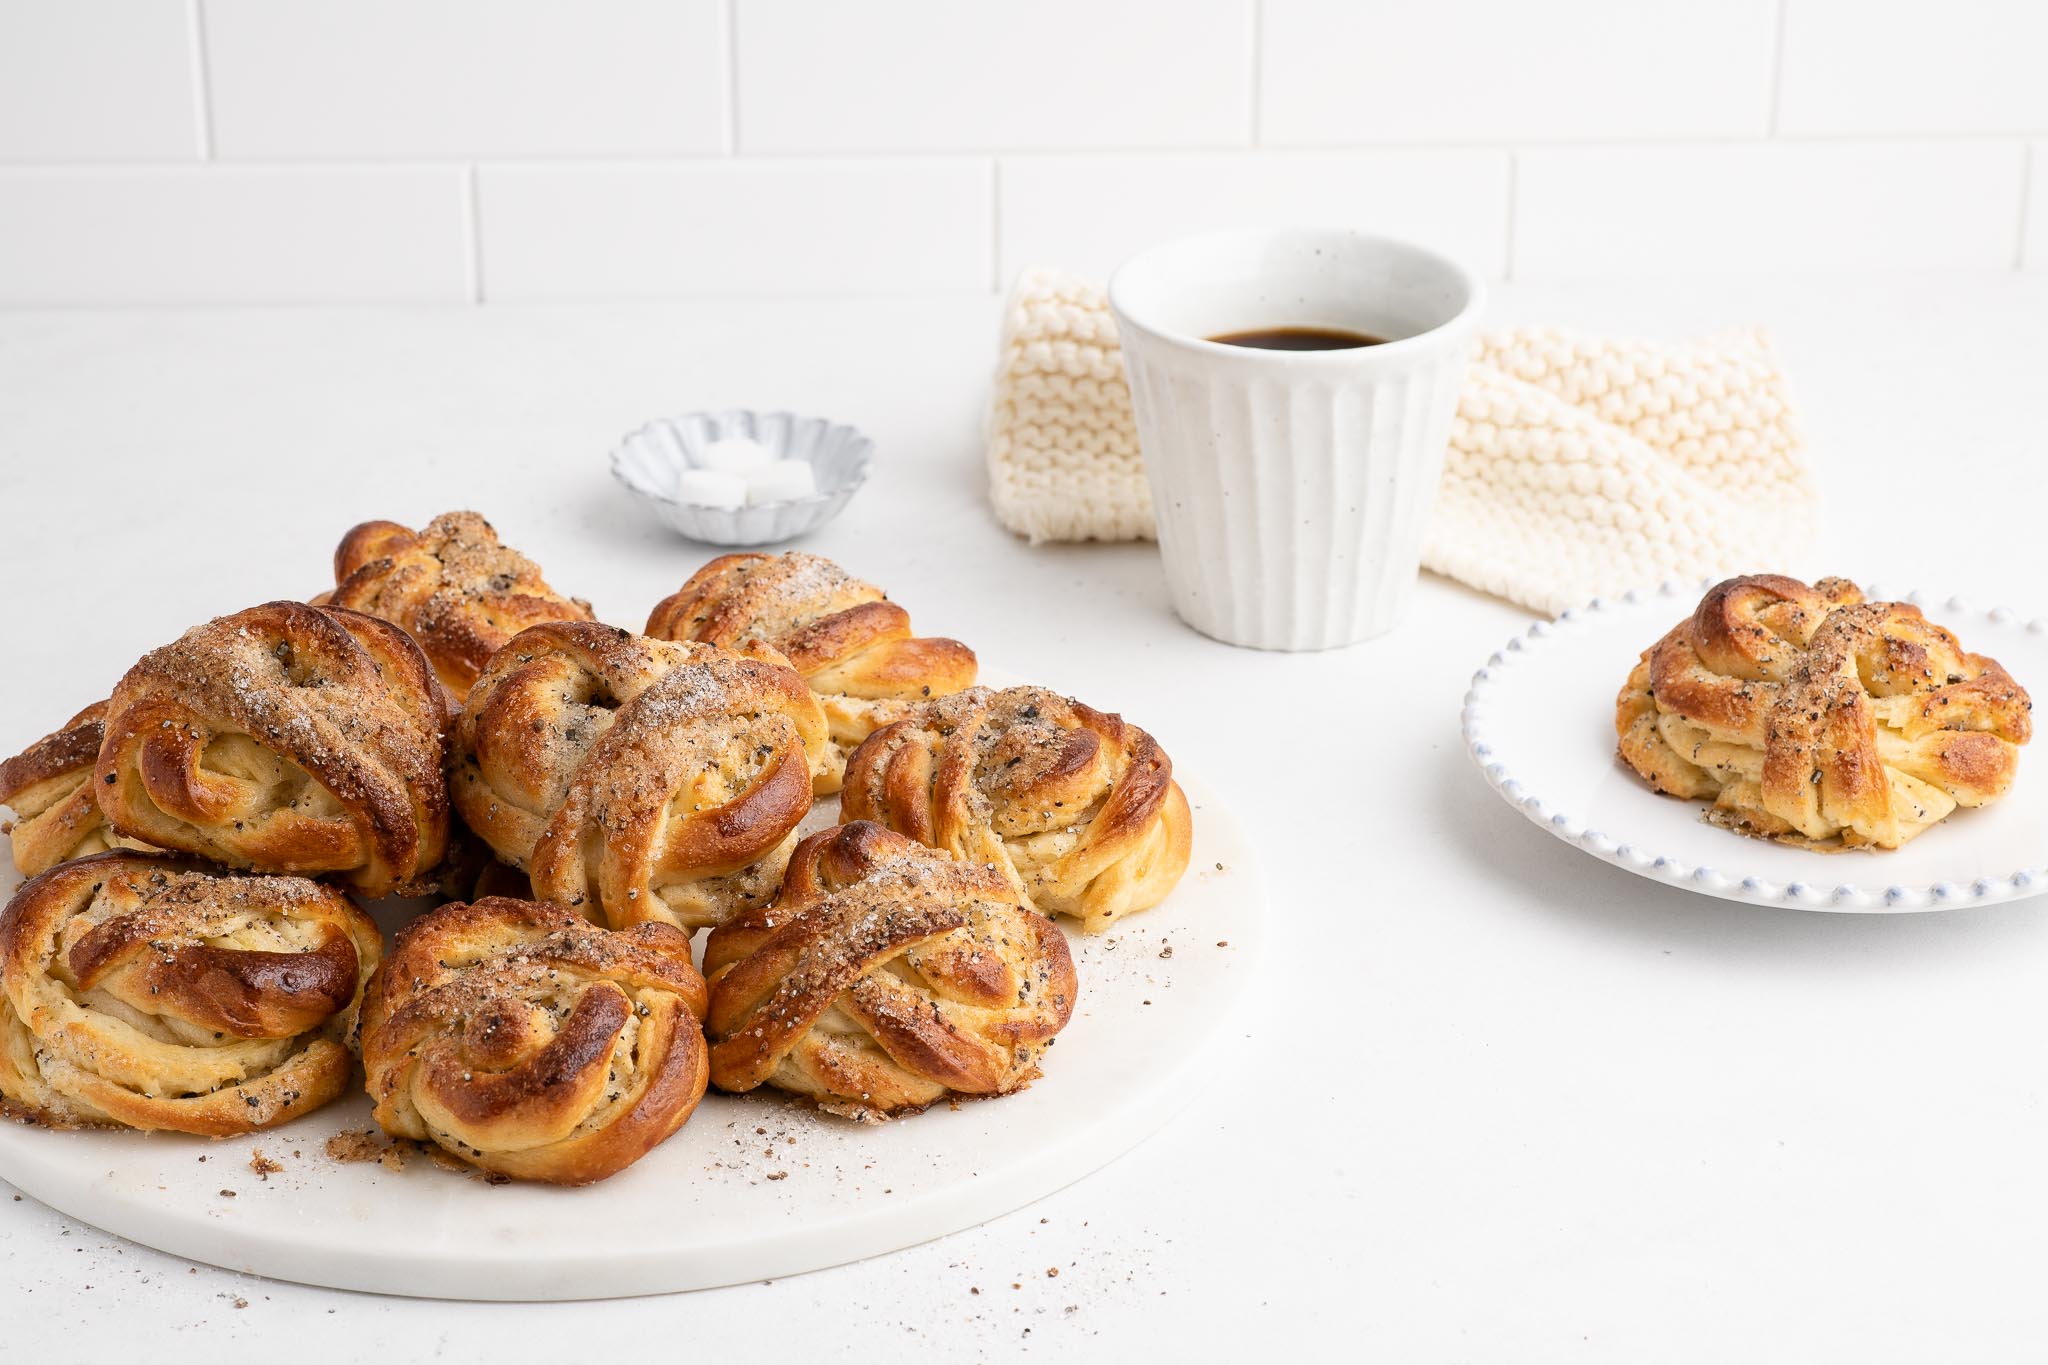 cardamom buns on white plate with coffee